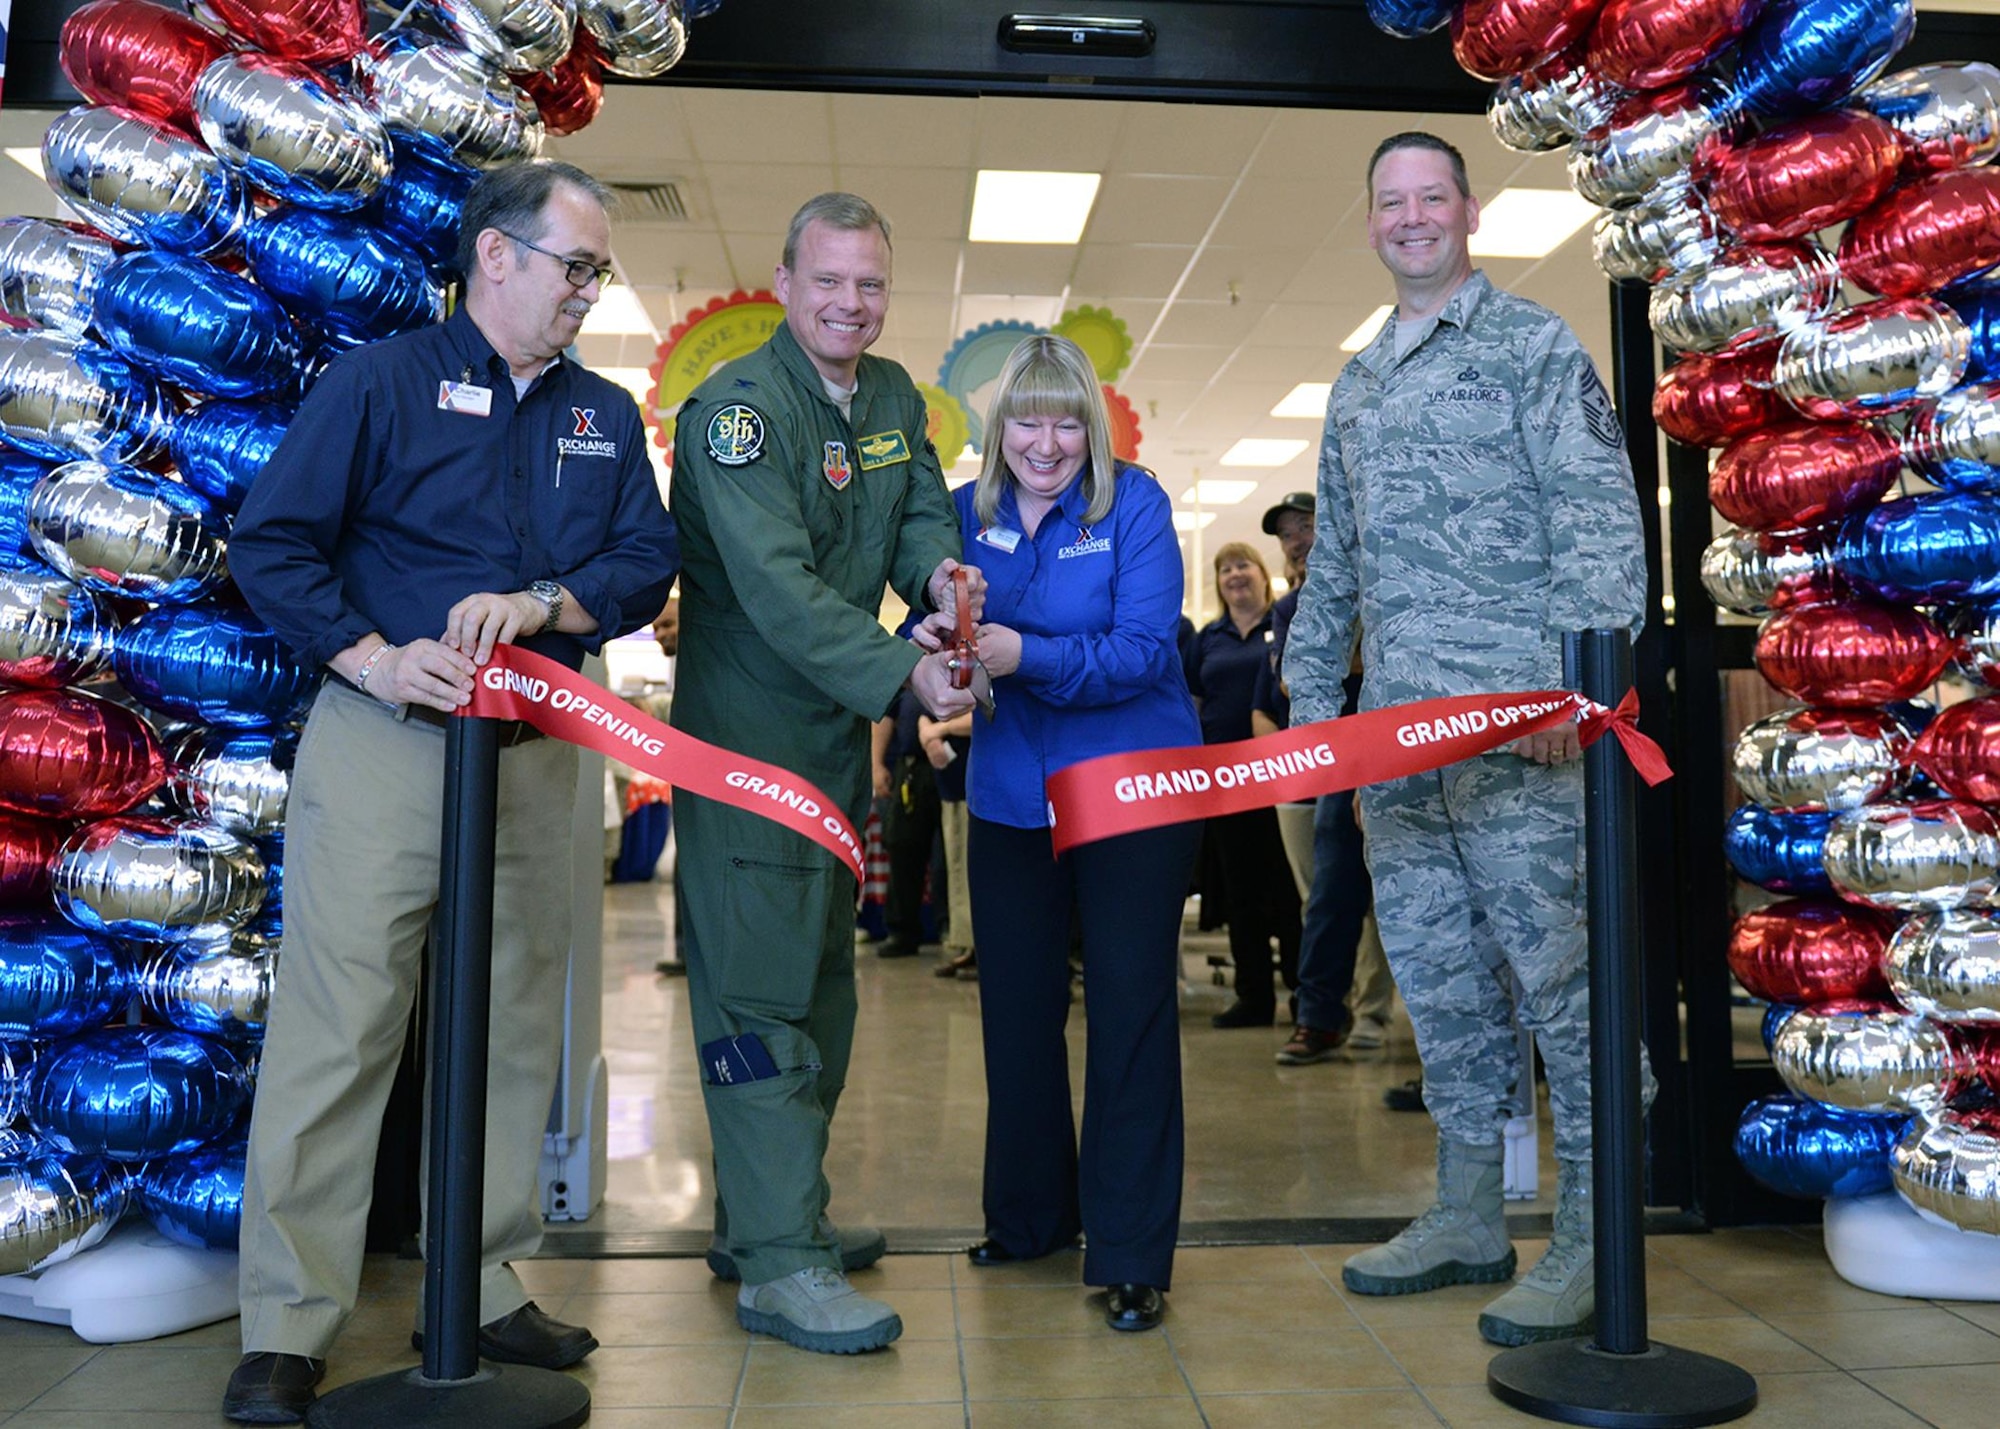 Beale leadership and Exchange management cut the ribbon during the grand re-opening of the newly renovated Base Exchange Feb. 25, 2016, Beale Air Force Base, California. The remodeling project cost approximate$1.9 million, which includes new flooring, a floor plan to accommodate an expanded product line, new displays, and a new central checkout location. (U.S. Air Force photo by Robert Scott)